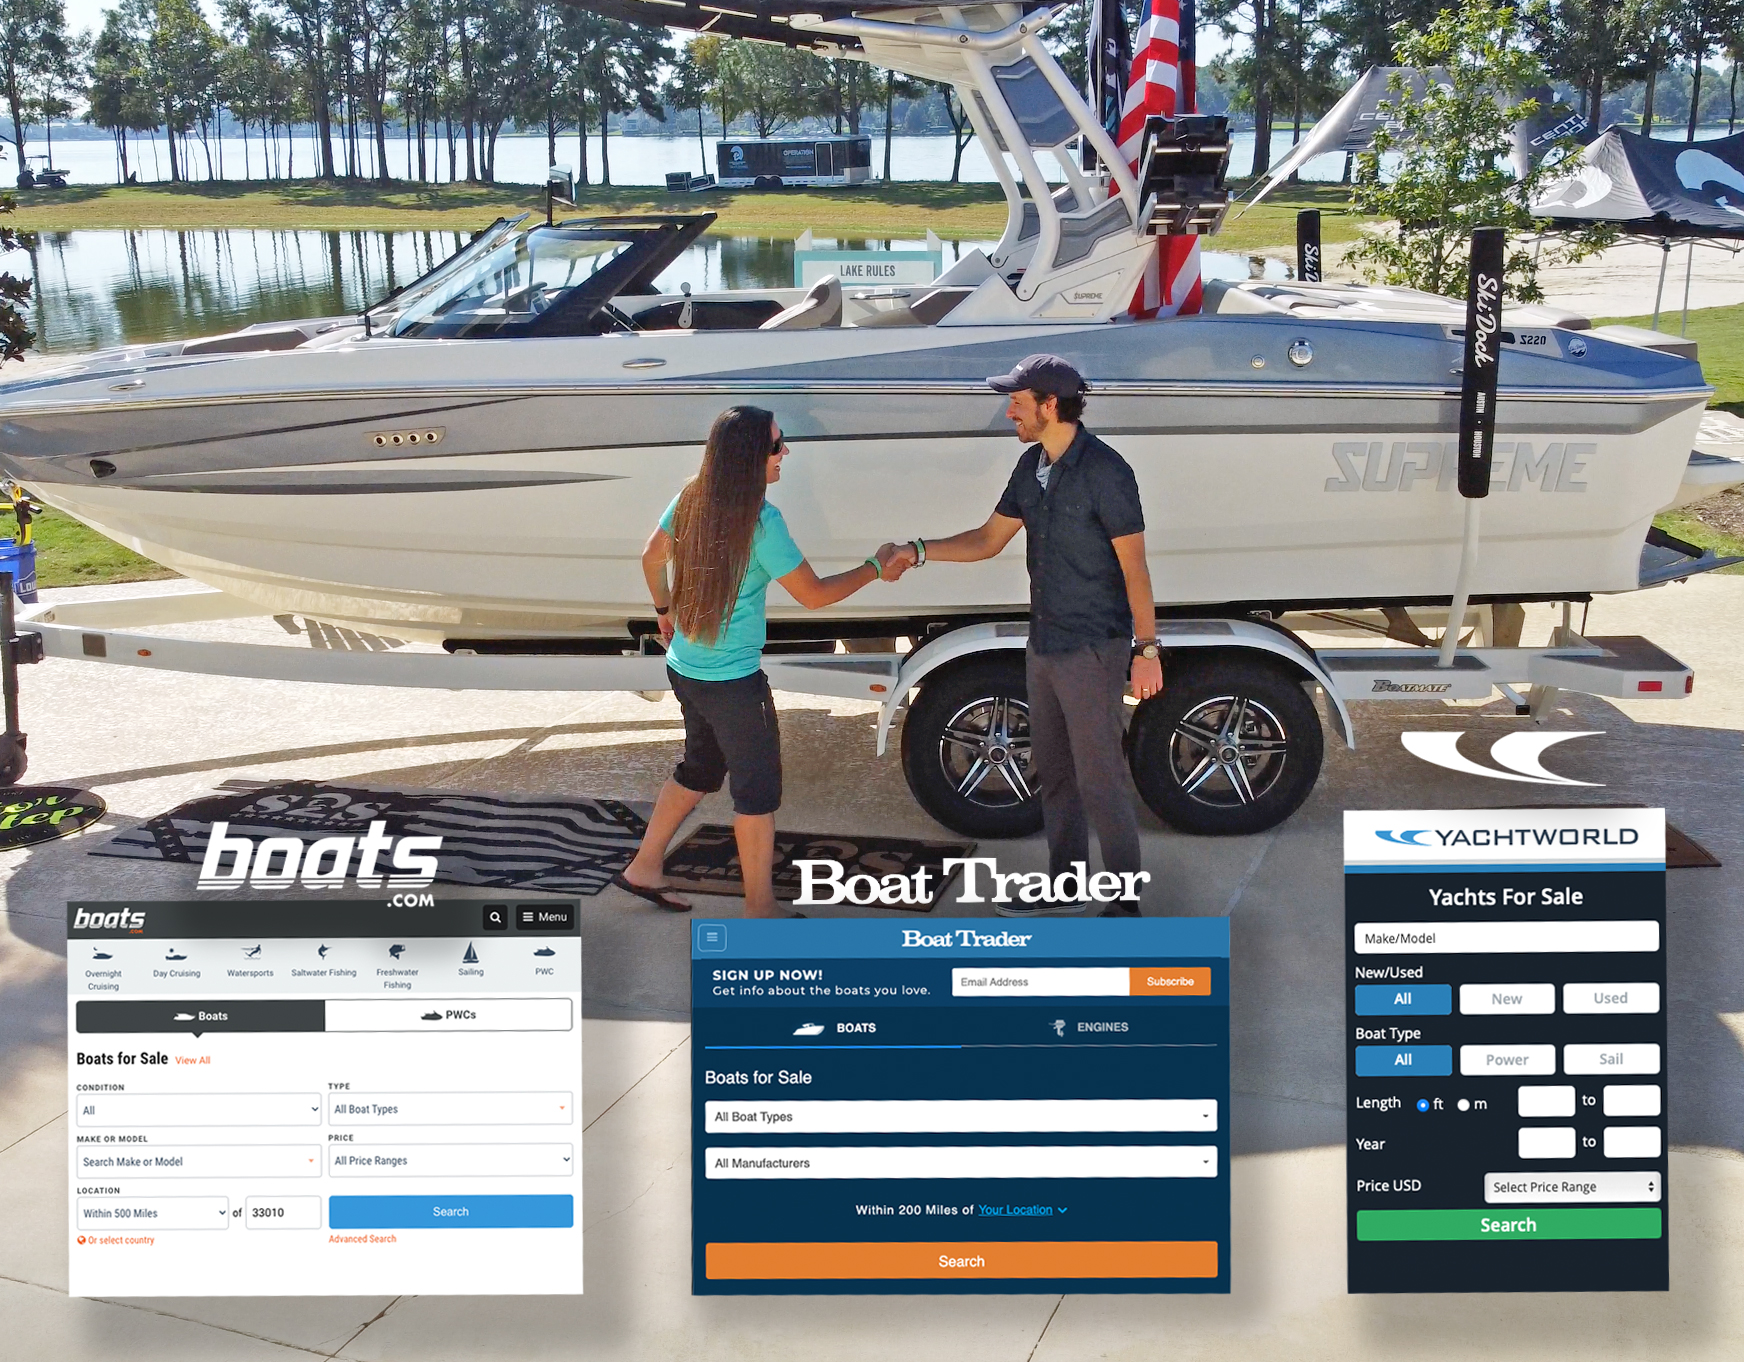 Where to Sell Your Boat Online?